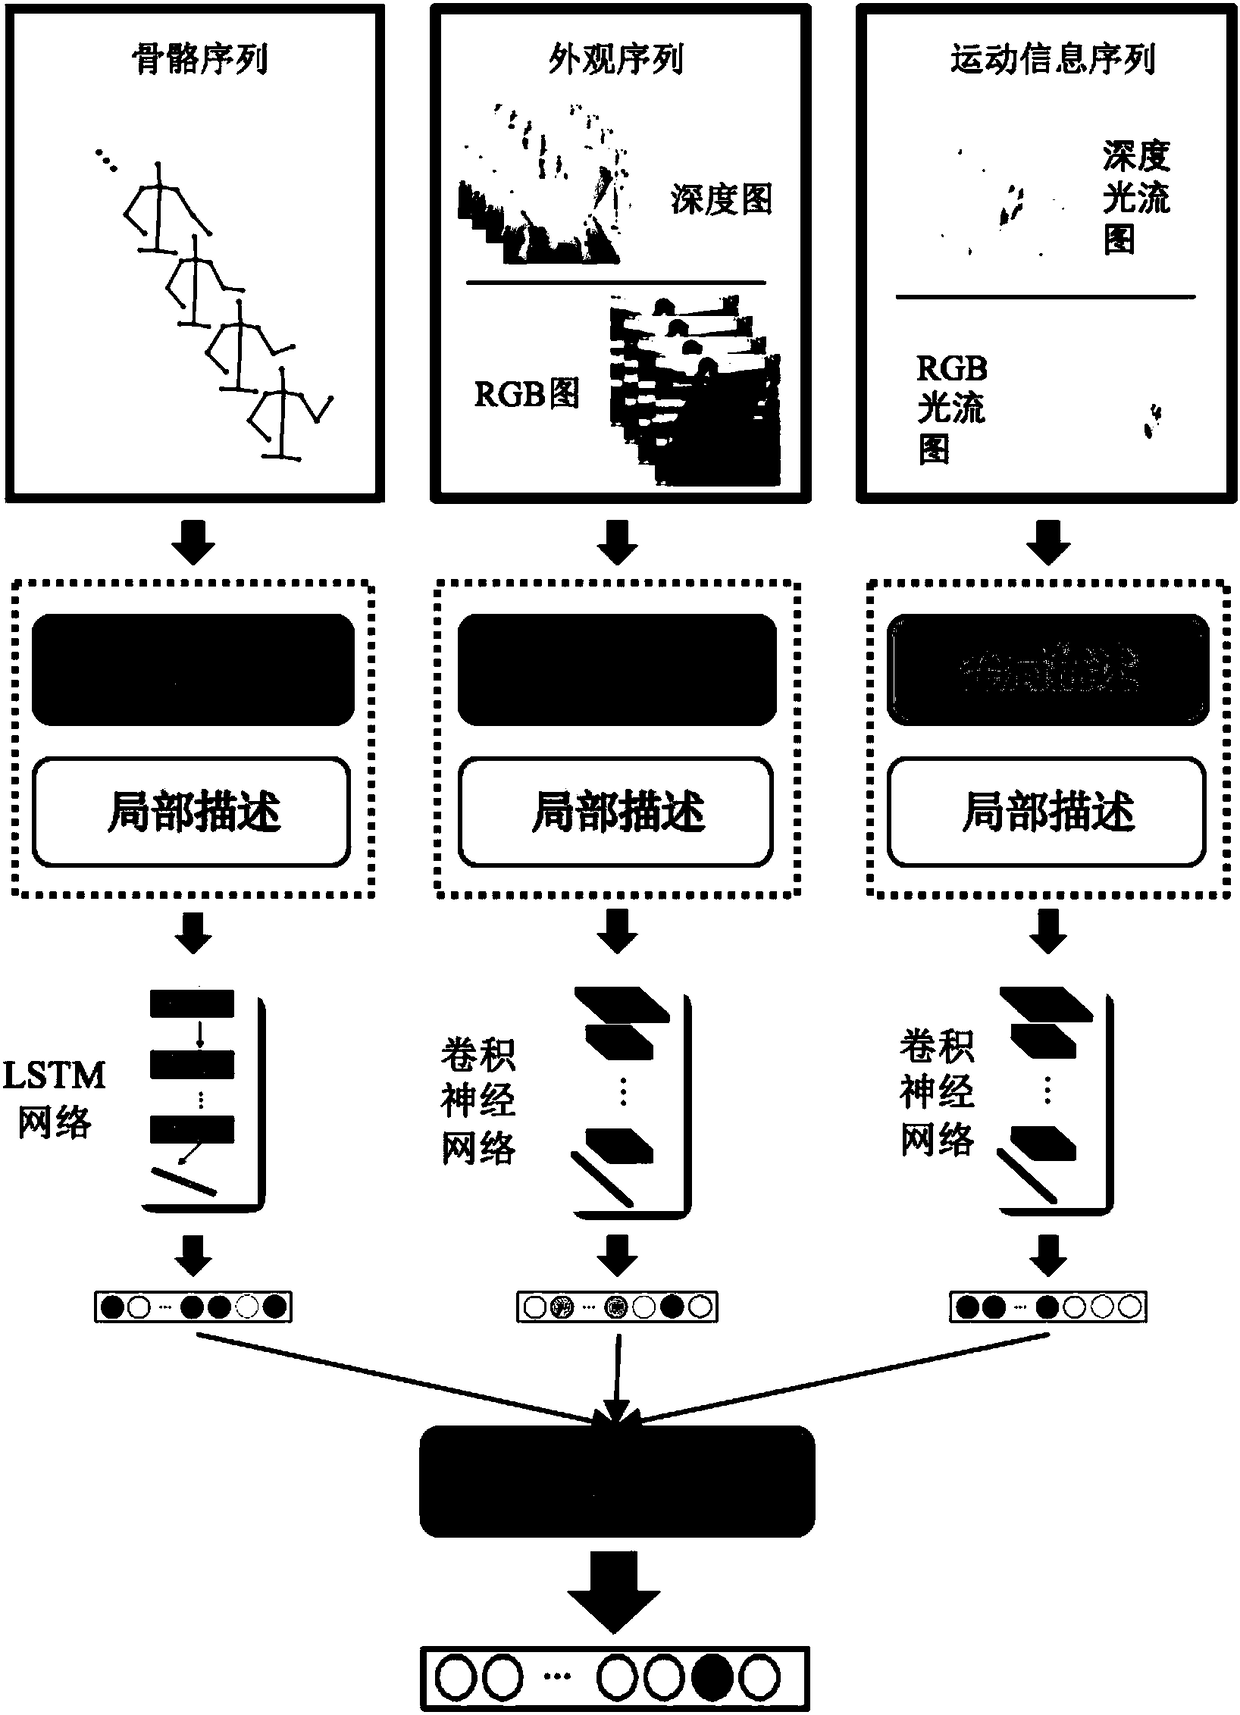 Global-local RGB-D multimode-based gesture recognition method